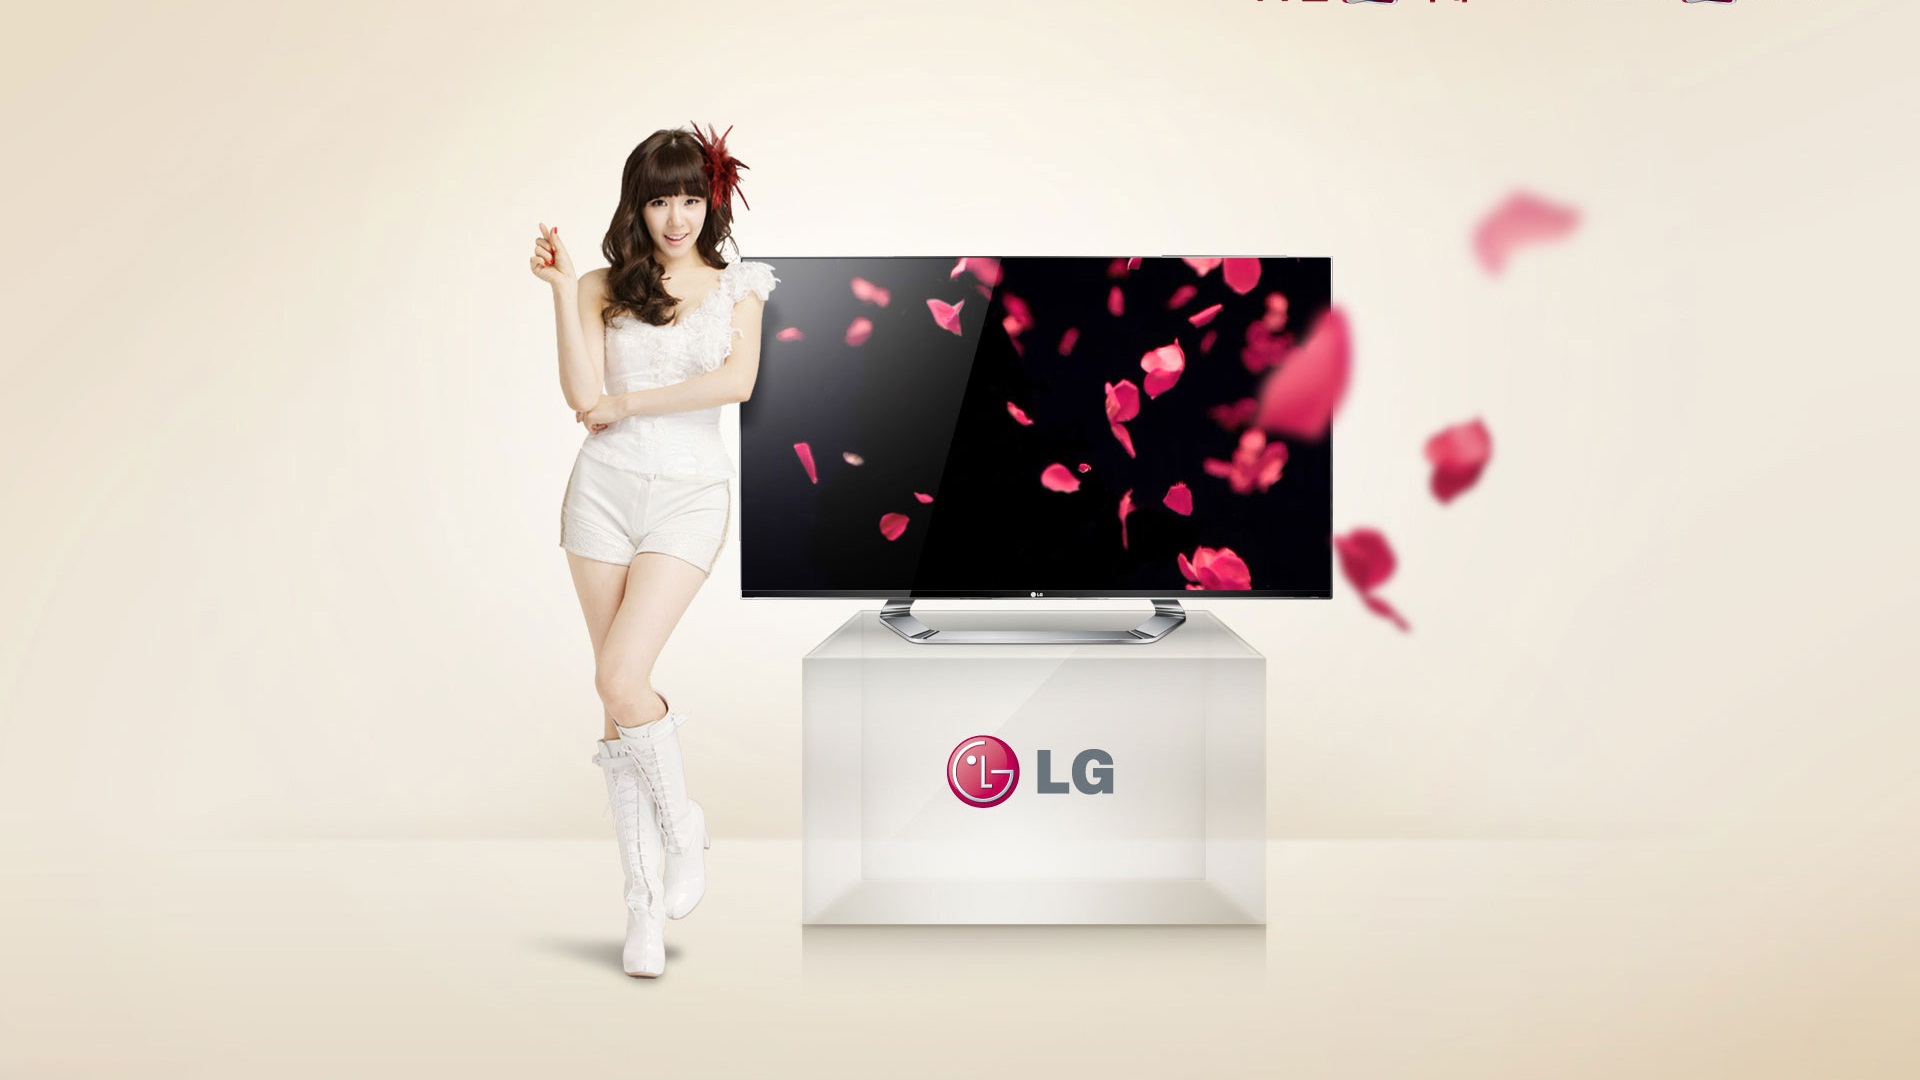 Girls Generation ACE and LG endorsements ads HD wallpapers #15 - 1920x1080